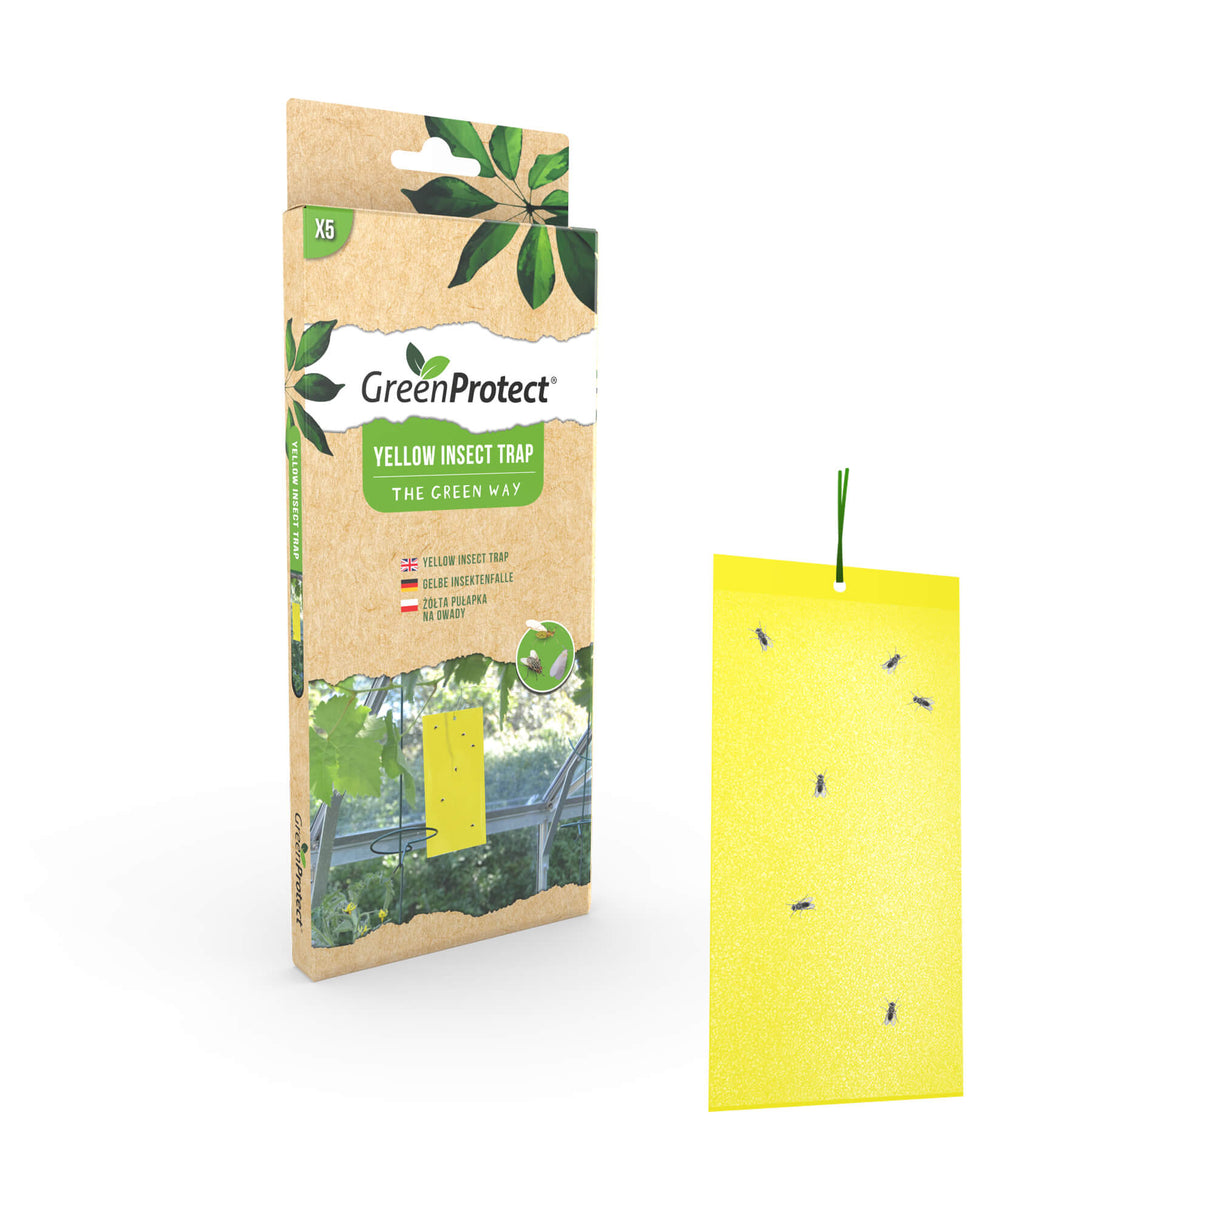 Yellow Insect Trap from green Protect